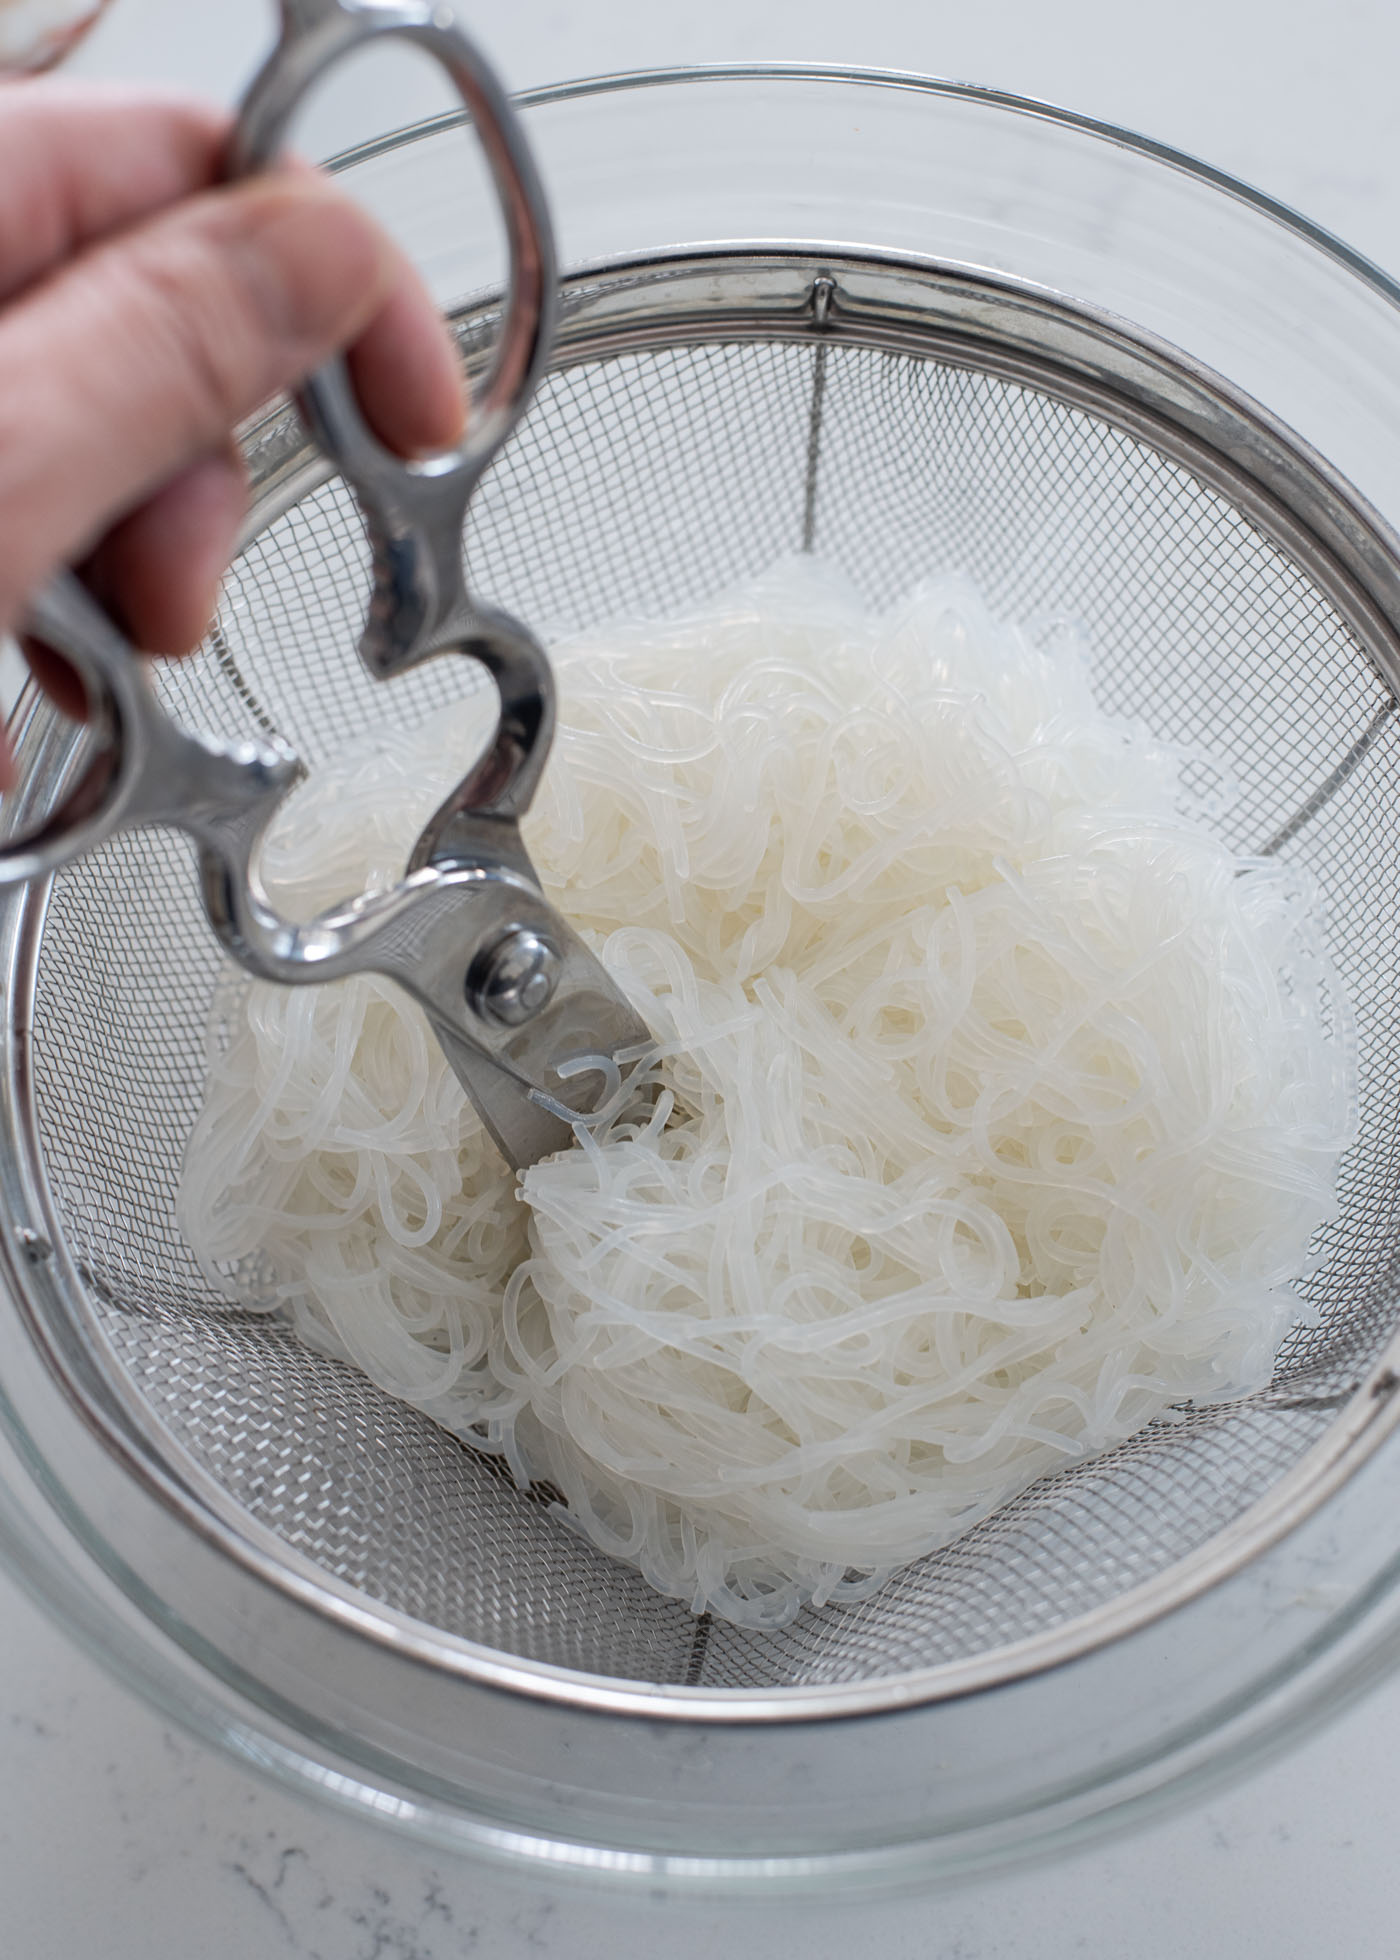 A pair of kitchen scissor is cutting up the drained glass noodles in a colander.